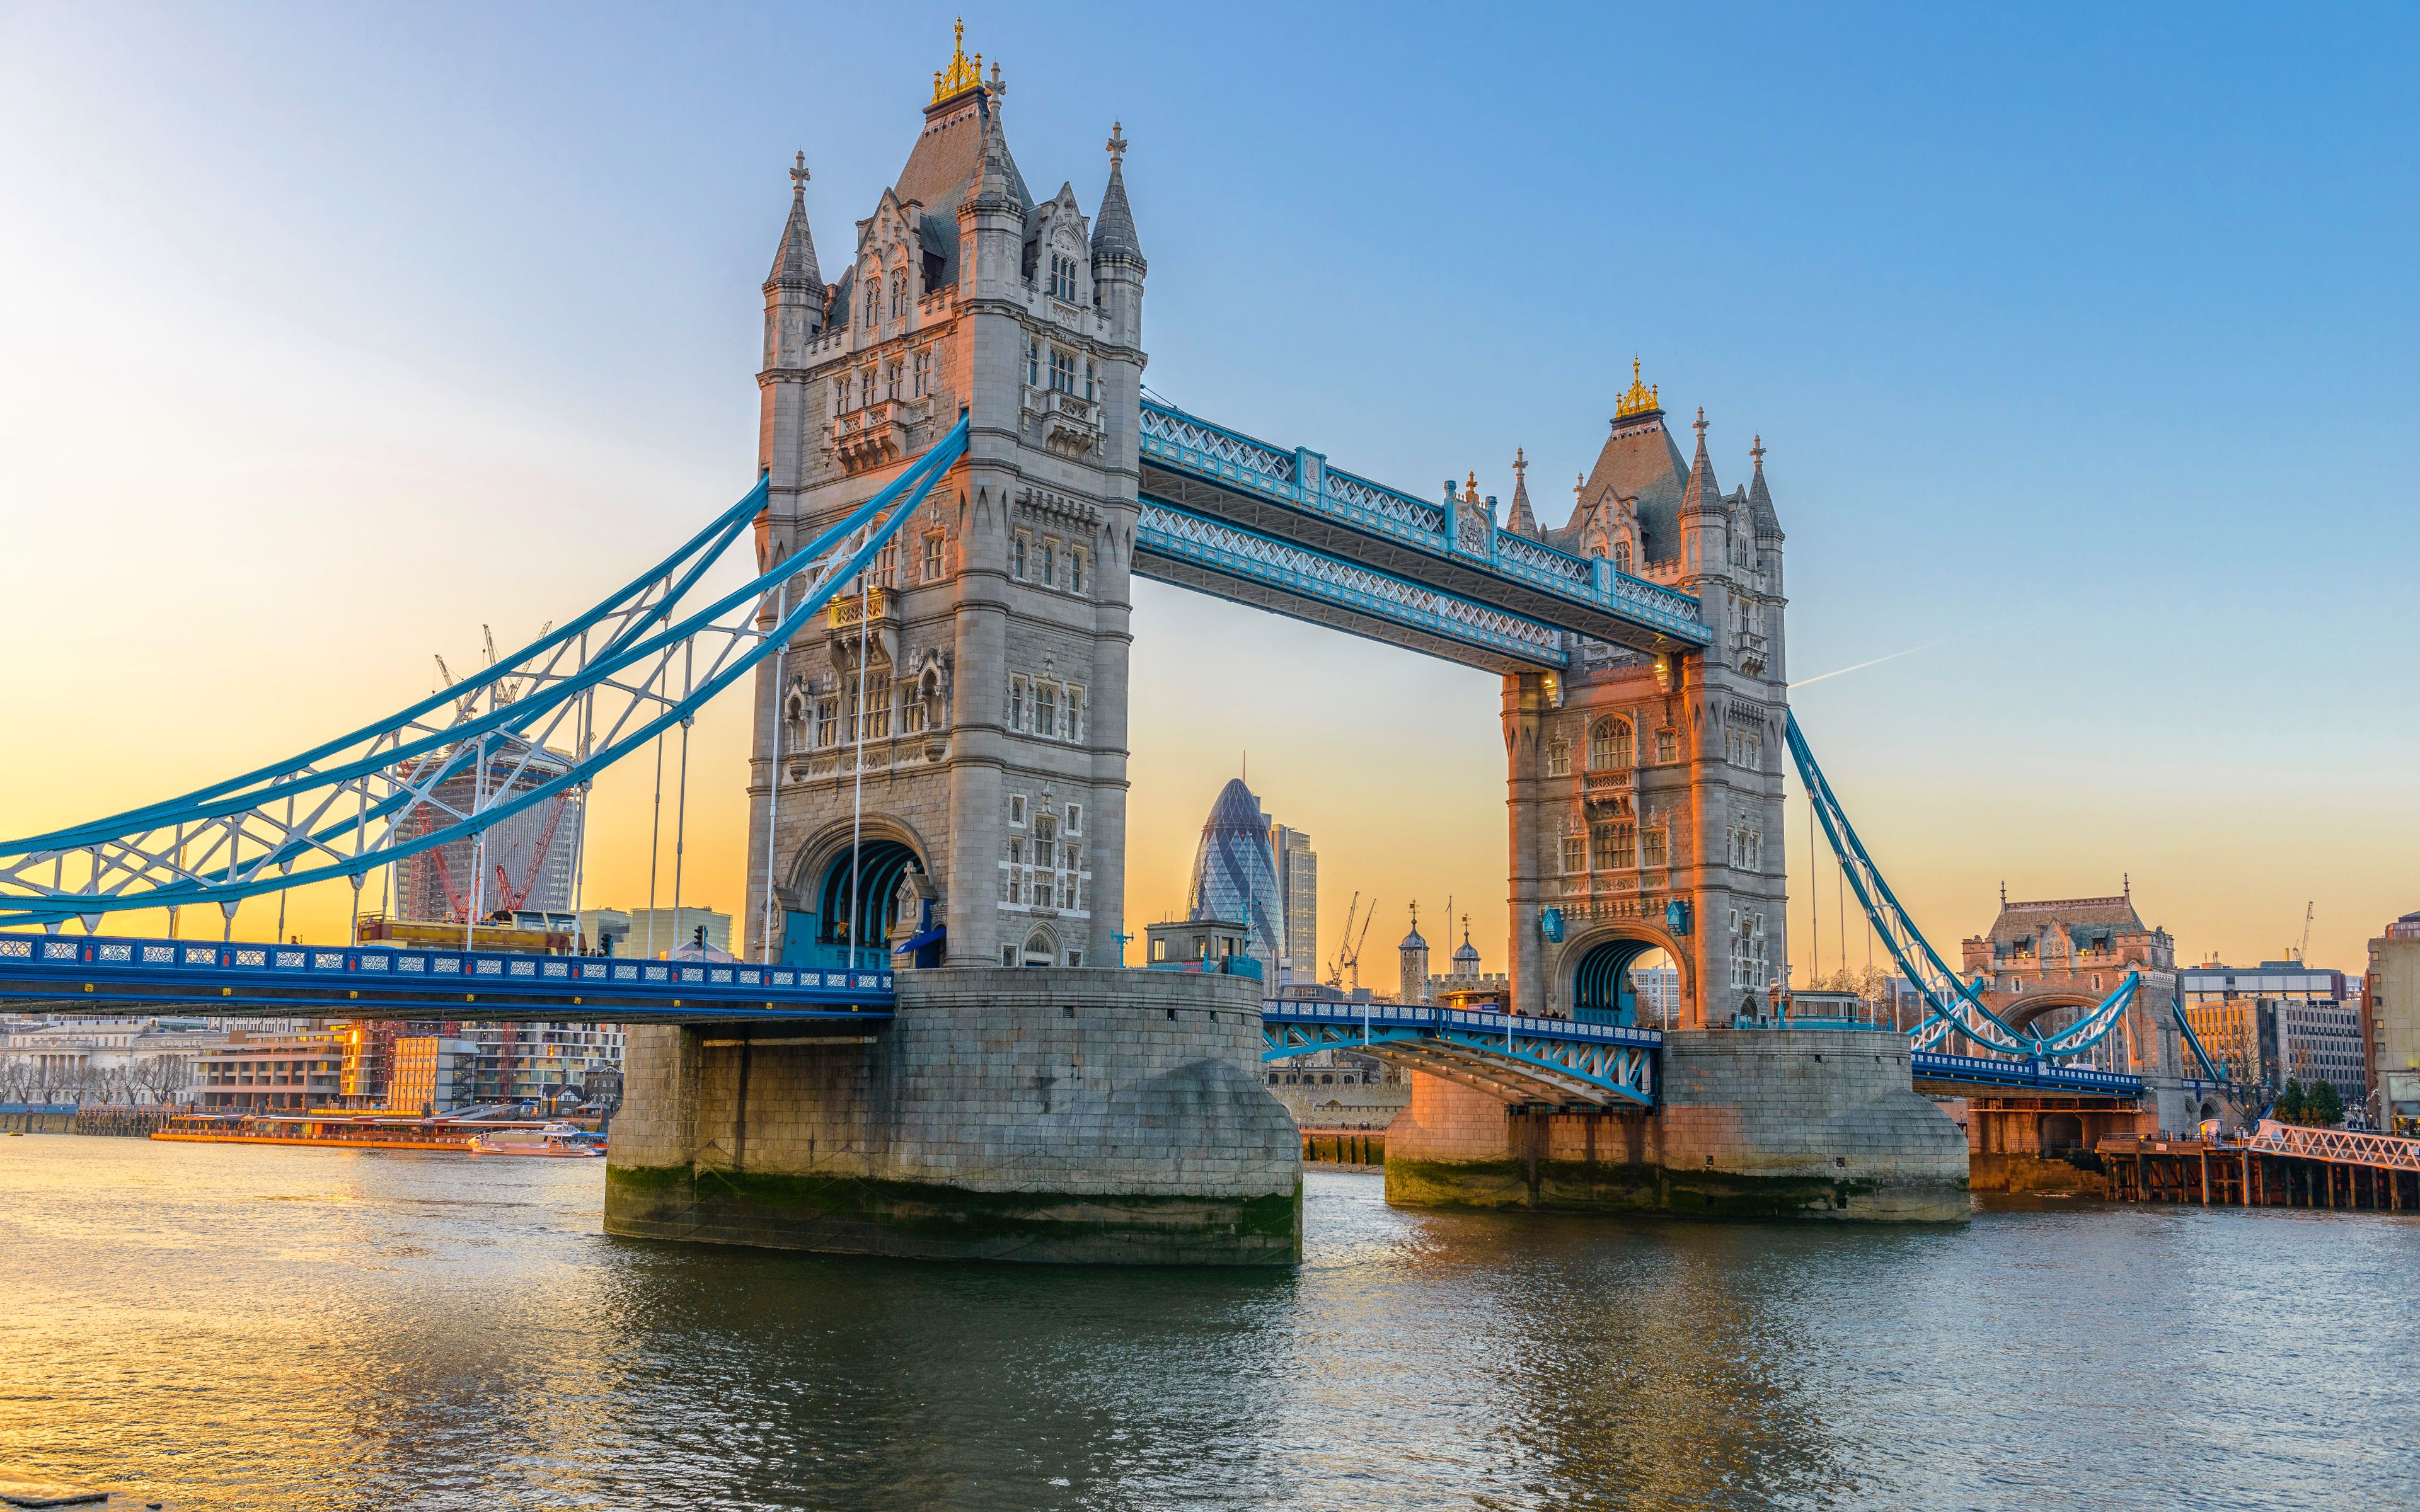 Download wallpaper Tower Bridge, 4k, sunset, River Thames, London, England, UK for desktop with resolution 3840x2400. High Quality HD picture wallpaper